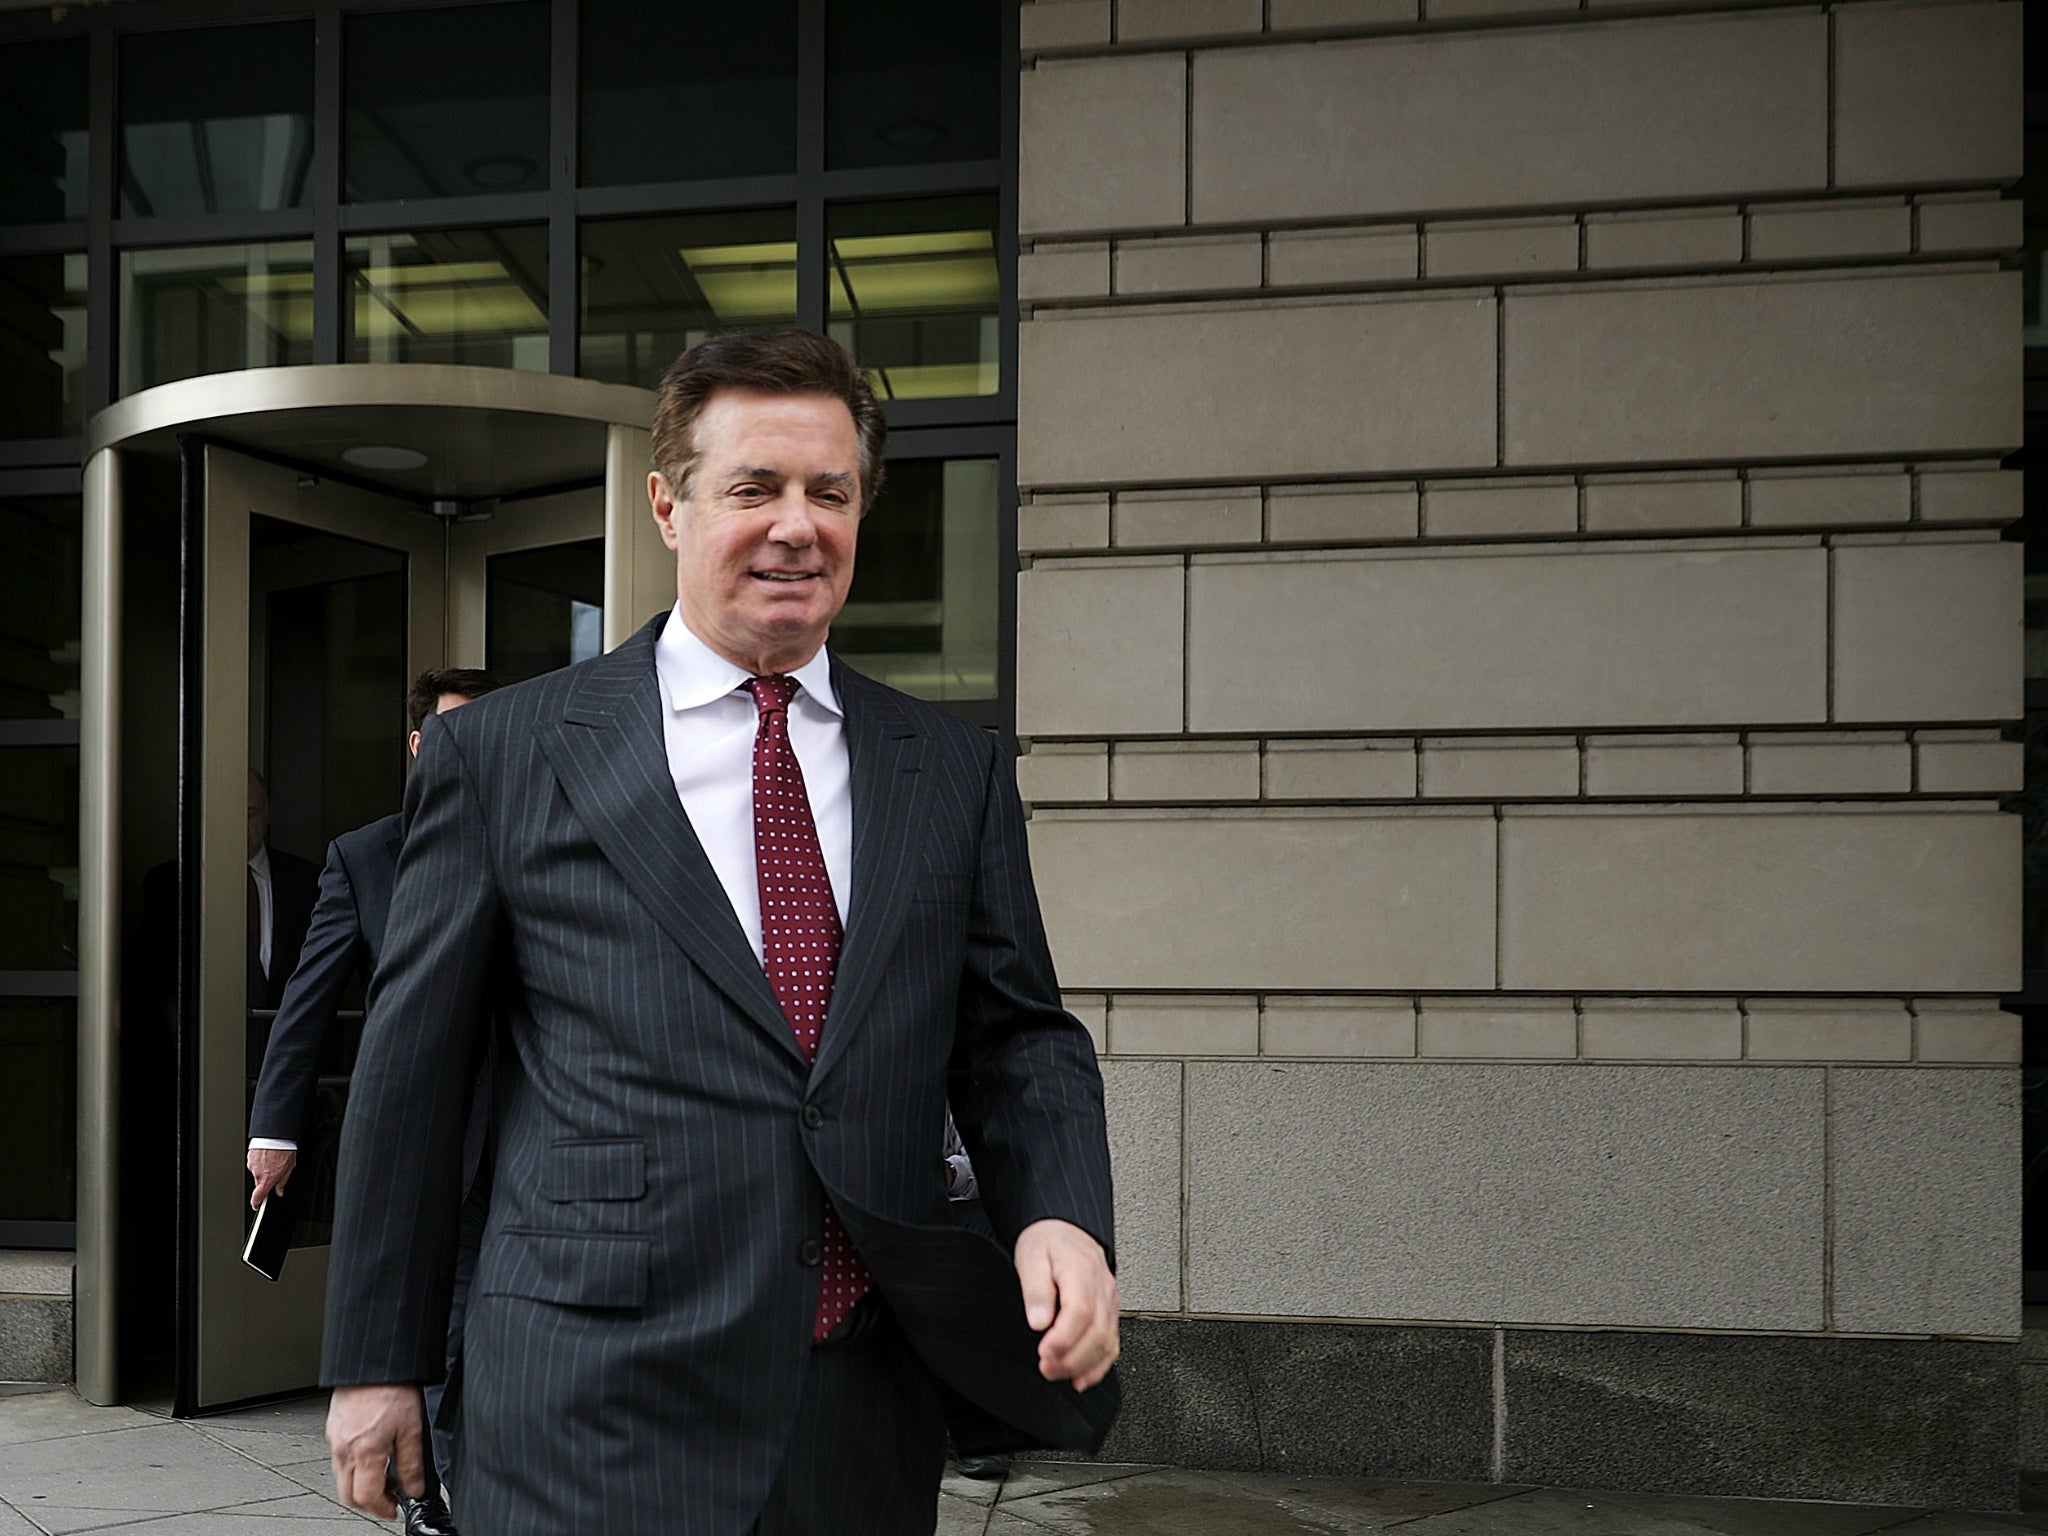 Paul Manafort‘s financial crimes court case will revolve around his Ukrainian consulting work and broadly steer away from his involvement with the president’s campaign